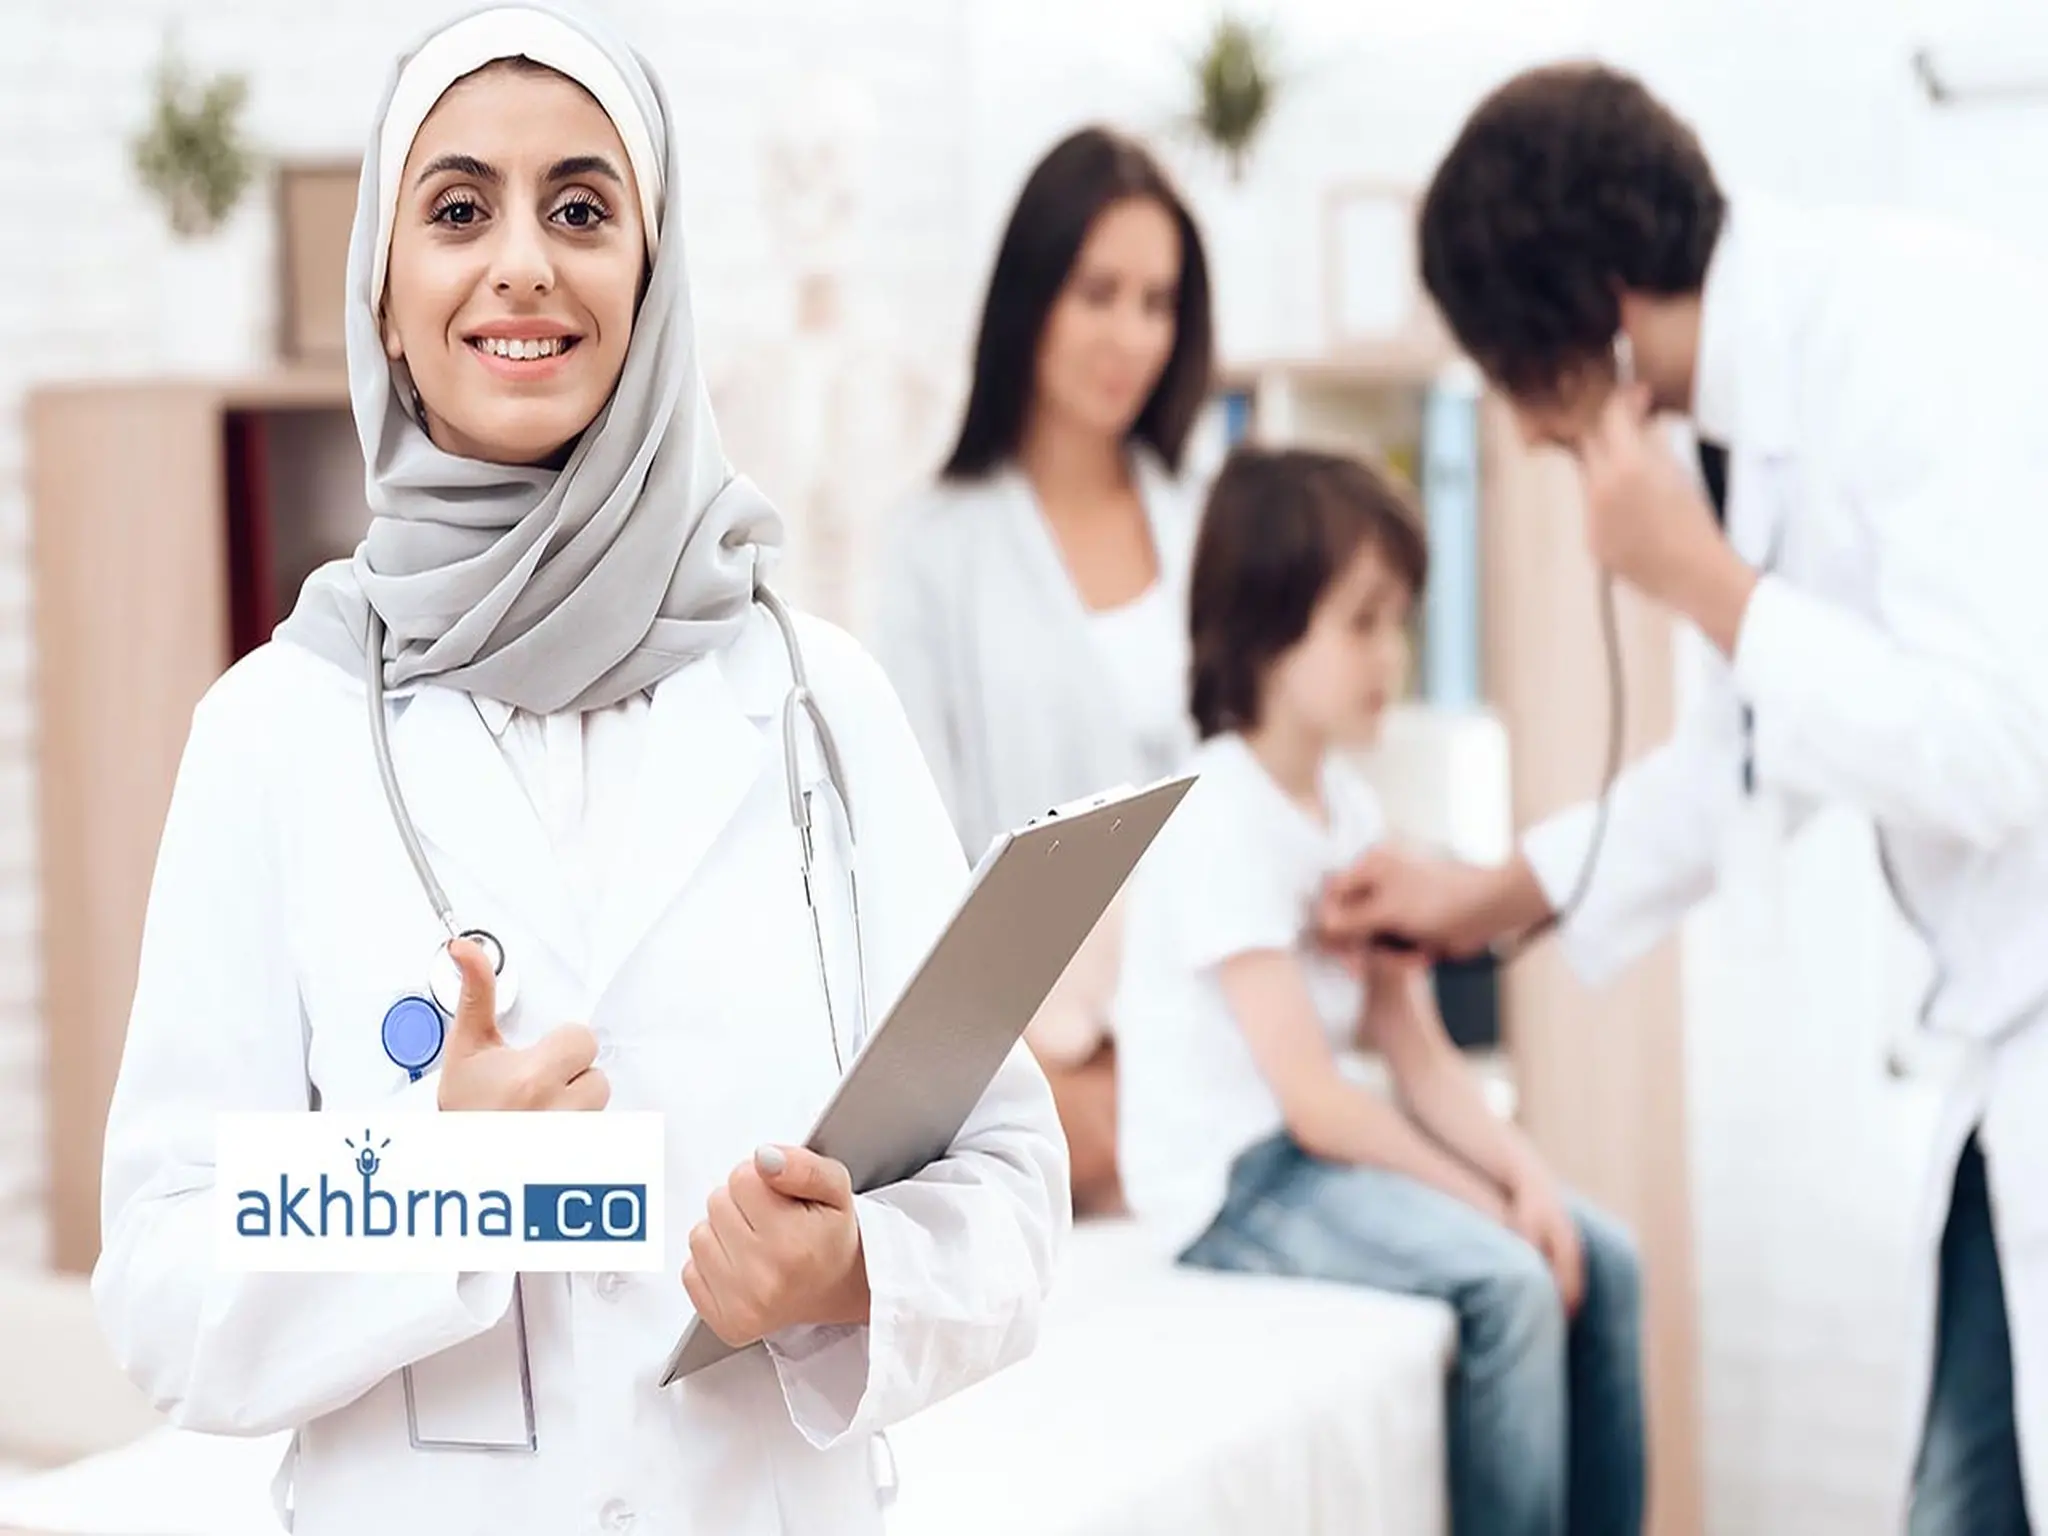 A health insurance policy in the UAE at a cost of 750 dirhams annually